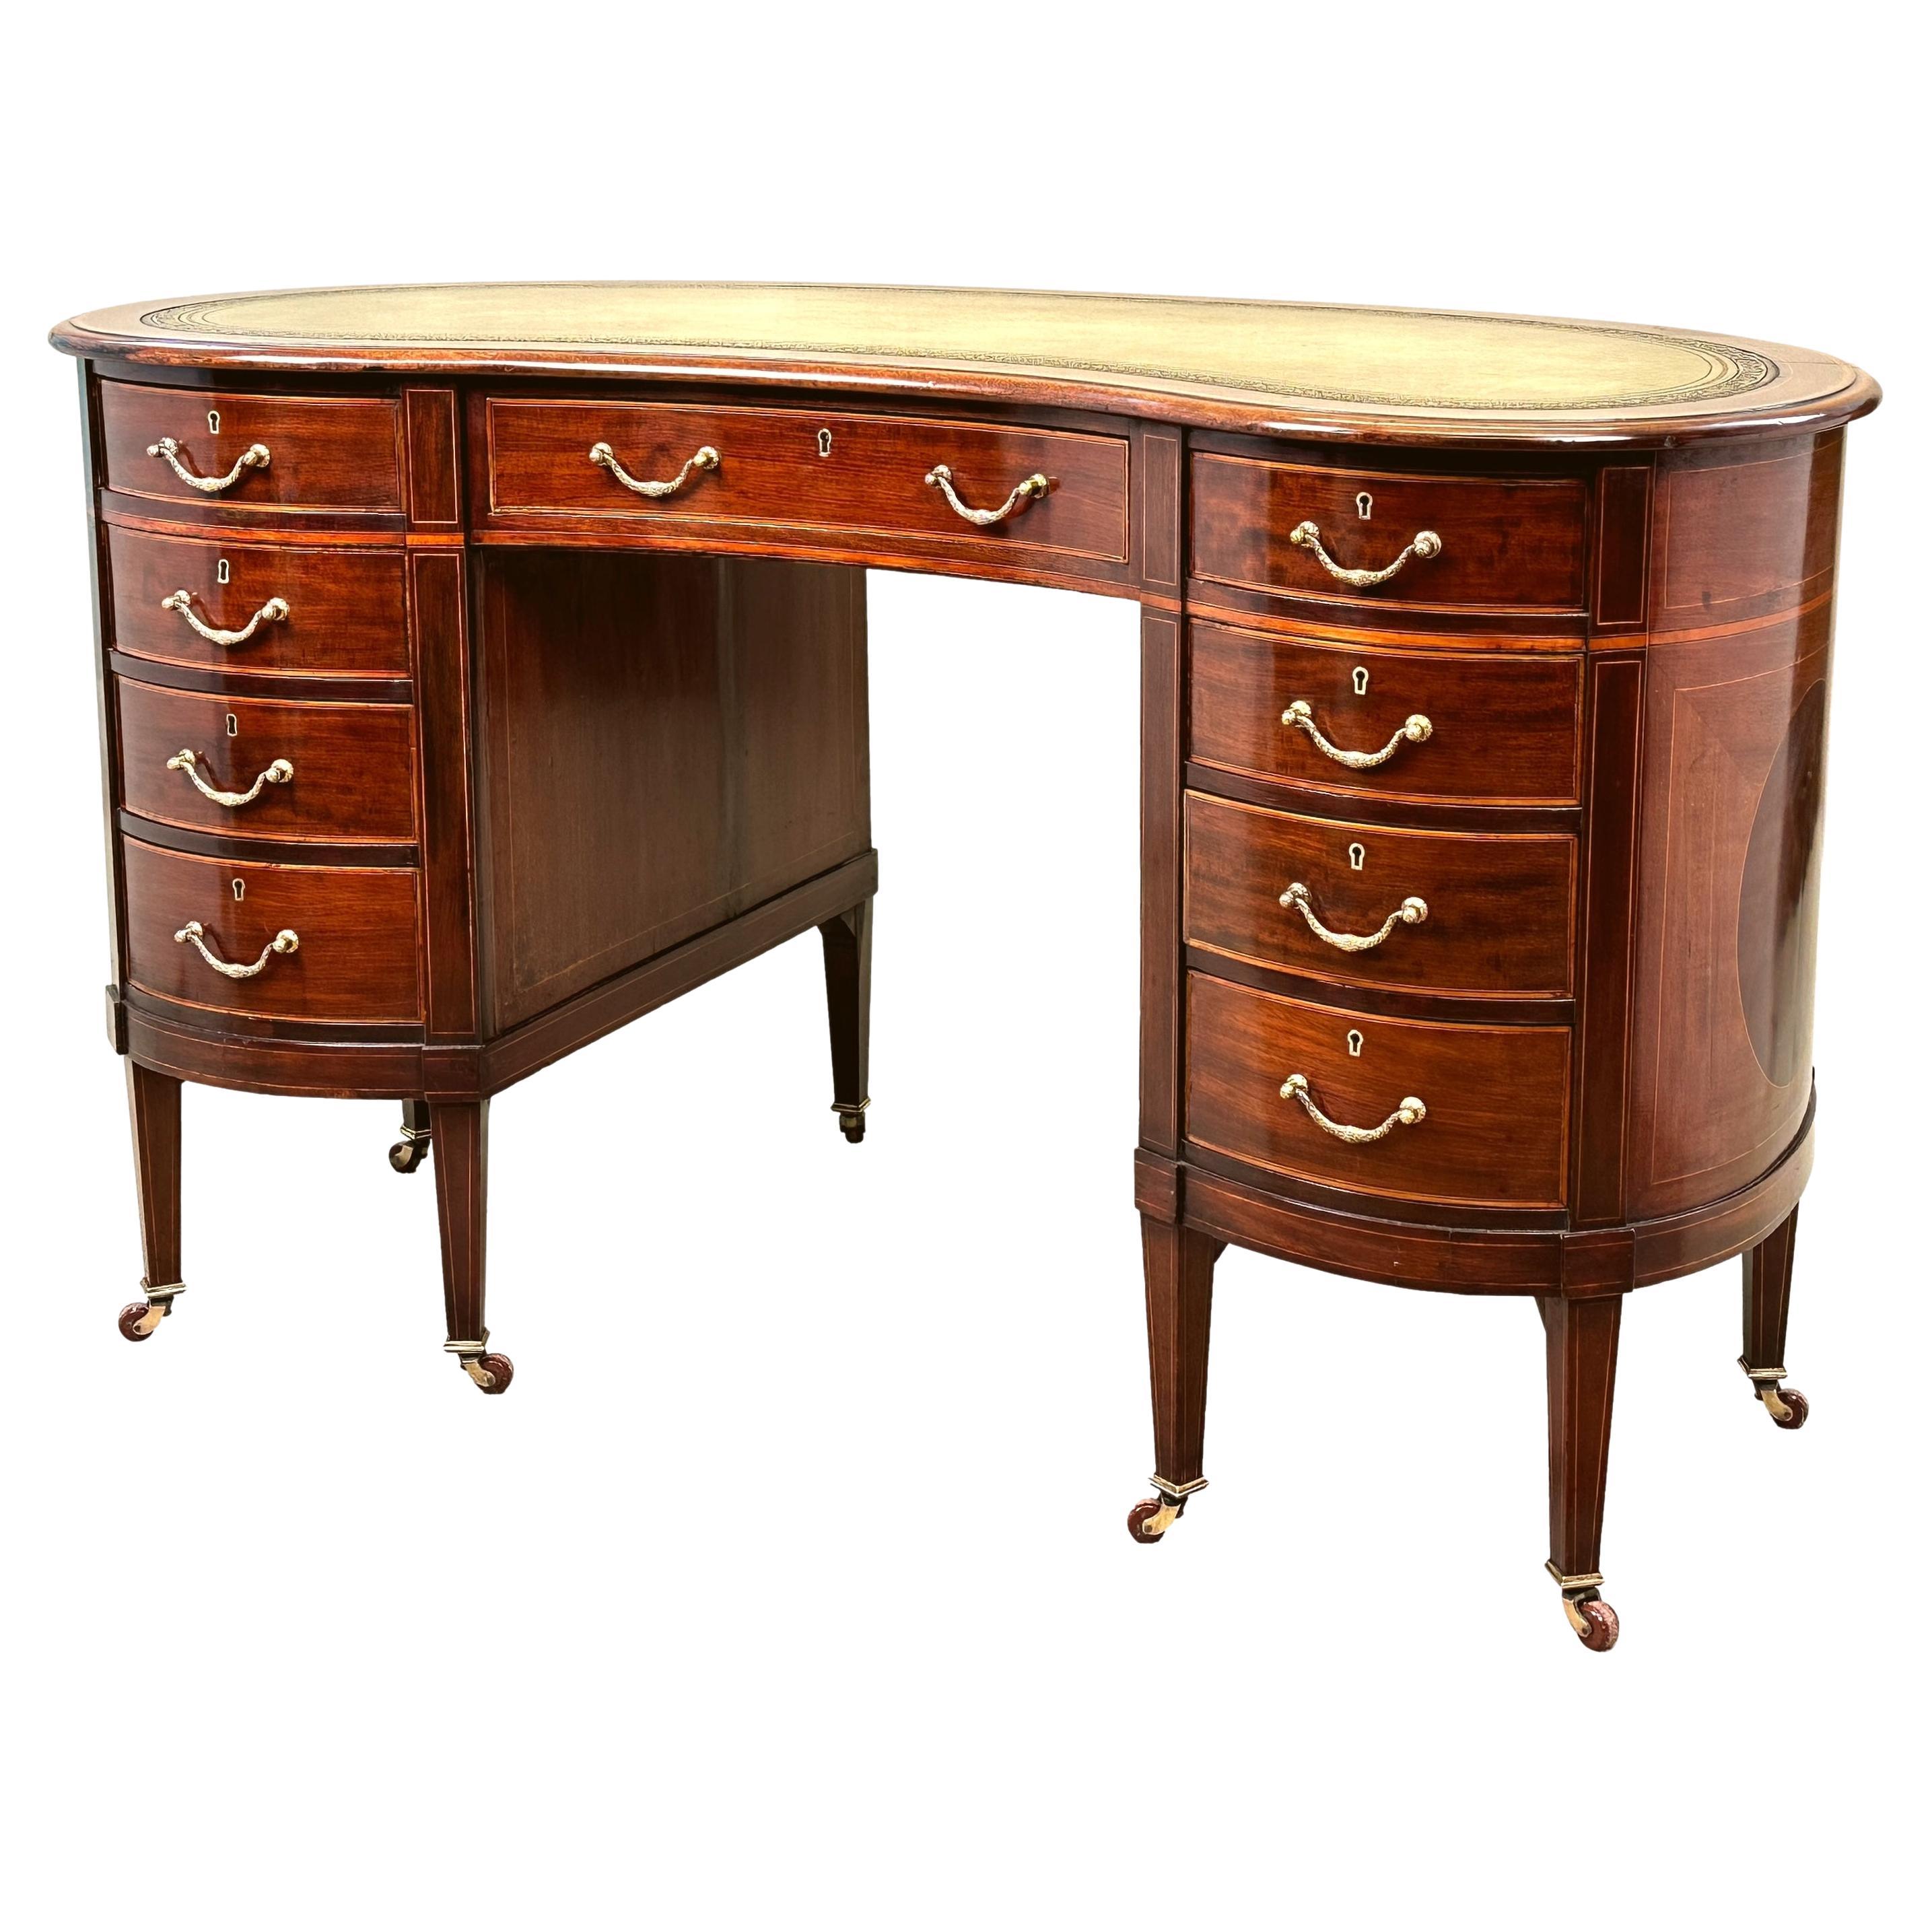 Late 19th Century Kidney Shaped Desk For Sale